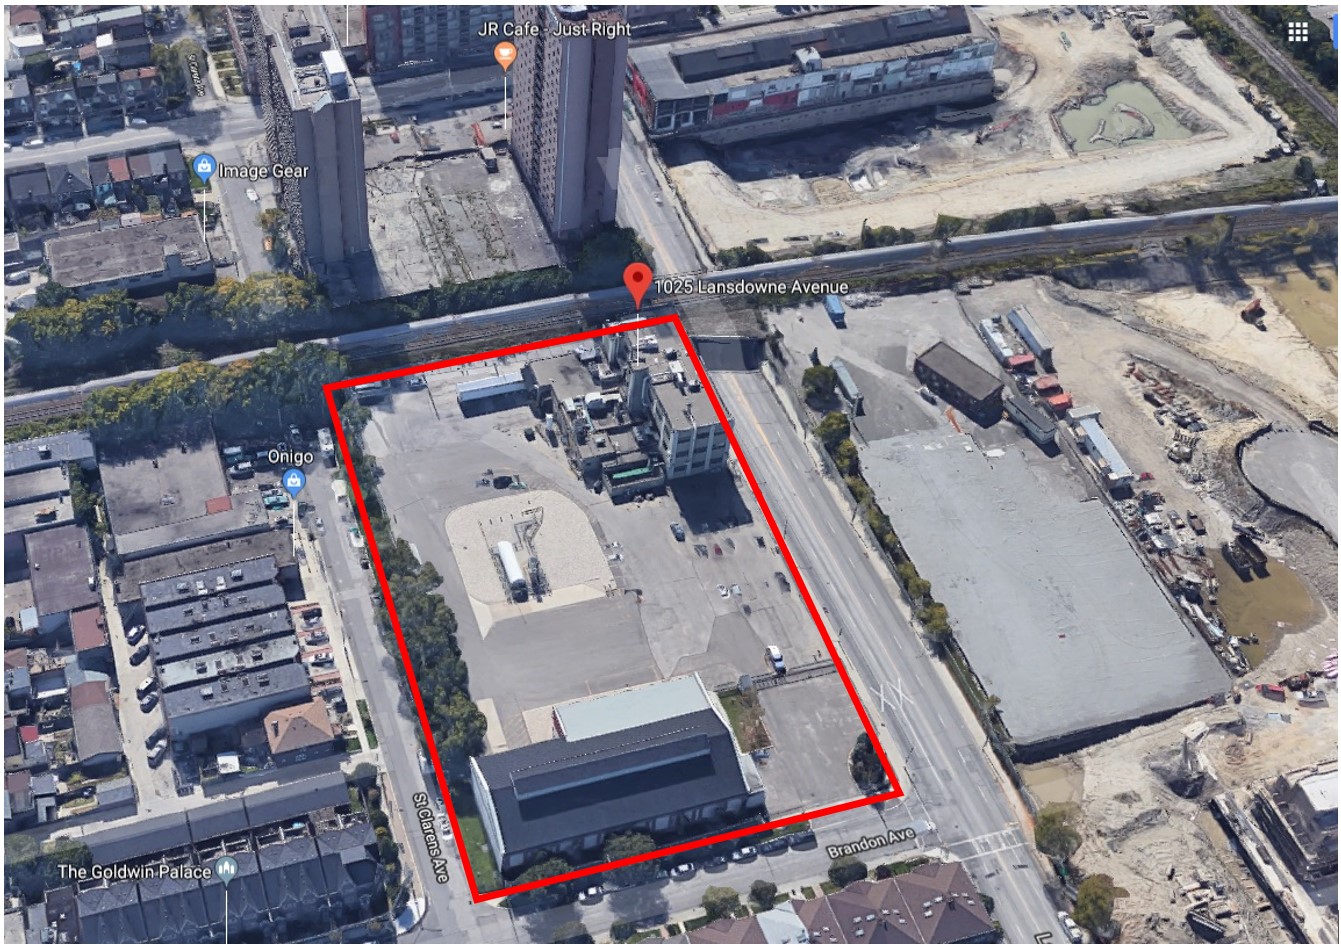 The facility premise, shown in an aerial photo and highlighted in a rectangle, has a few small buildings.